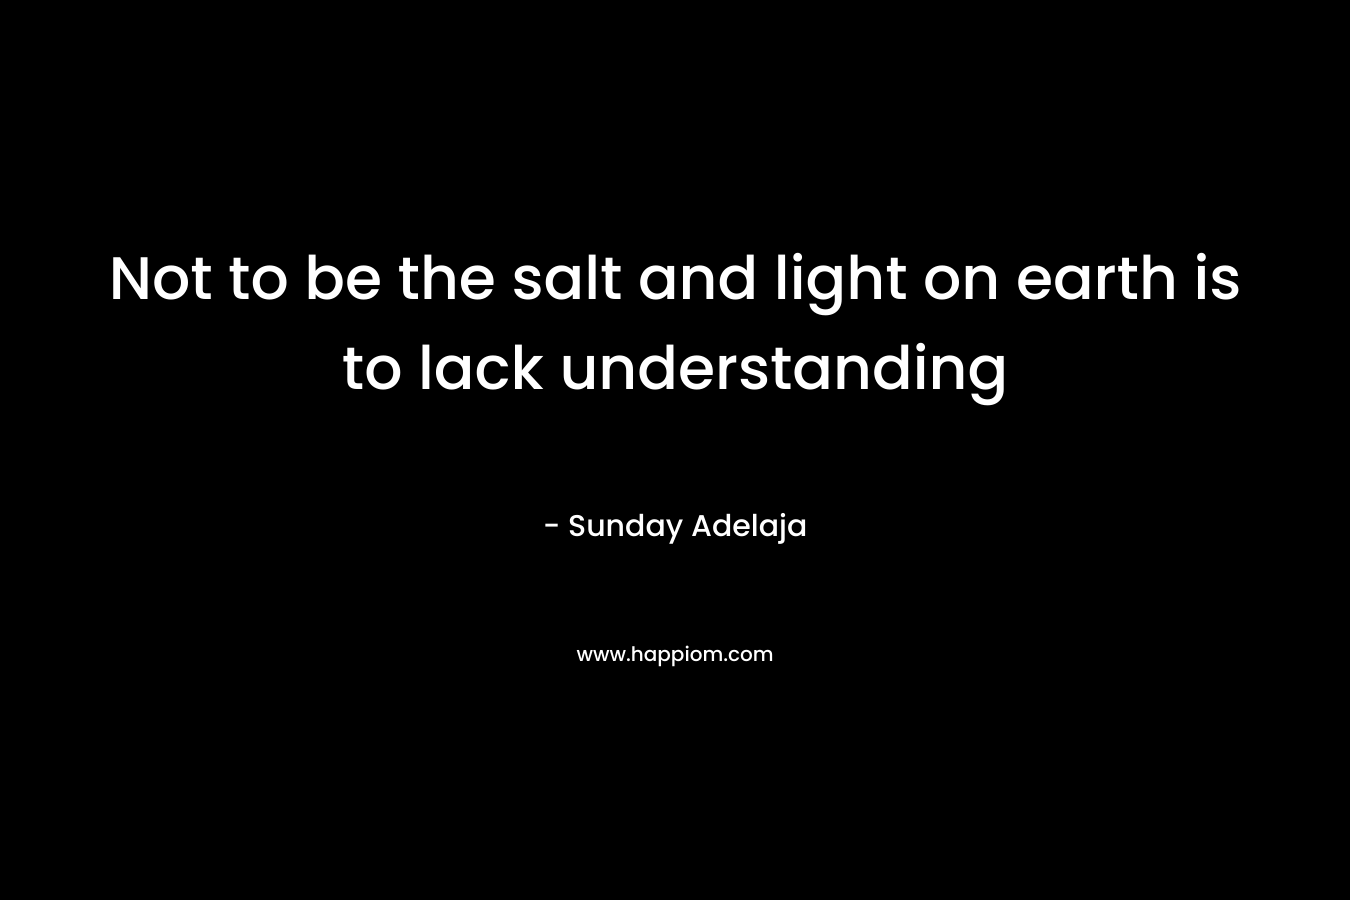 Not to be the salt and light on earth is to lack understanding